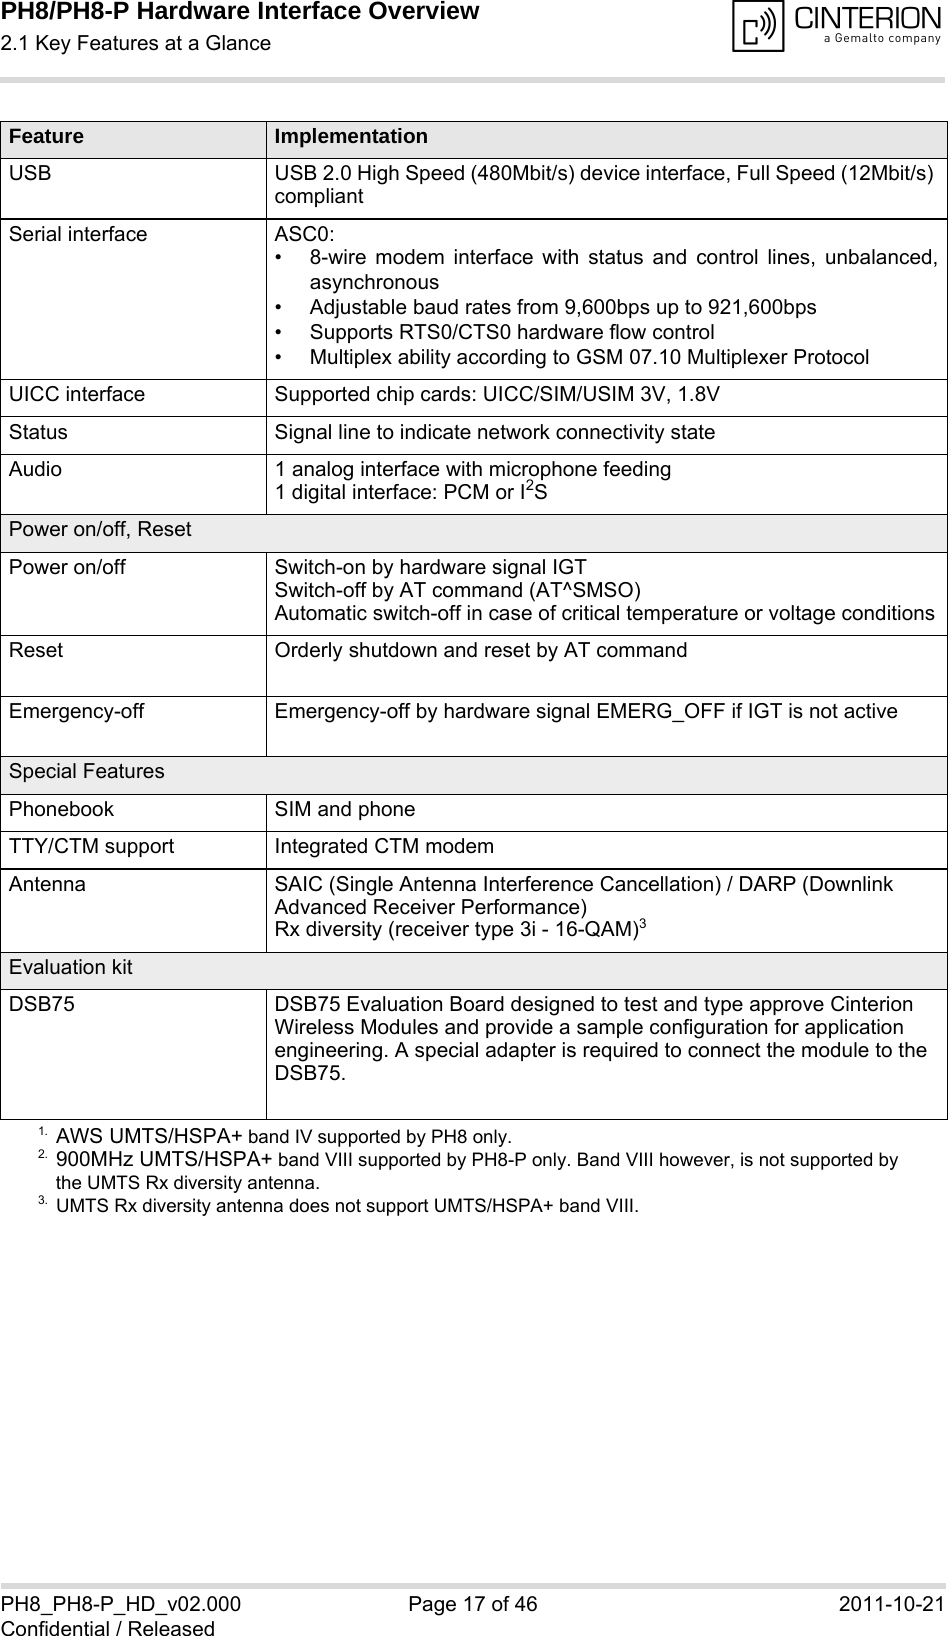 PH8/PH8-P Hardware Interface Overview2.1 Key Features at a Glance18PH8_PH8-P_HD_v02.000 Page 17 of 46 2011-10-21Confidential / ReleasedUSB USB 2.0 High Speed (480Mbit/s) device interface, Full Speed (12Mbit/s) compliantSerial interface ASC0:• 8-wire modem interface with status and control lines, unbalanced,asynchronous• Adjustable baud rates from 9,600bps up to 921,600bps• Supports RTS0/CTS0 hardware flow control• Multiplex ability according to GSM 07.10 Multiplexer ProtocolUICC interface Supported chip cards: UICC/SIM/USIM 3V, 1.8VStatus Signal line to indicate network connectivity stateAudio 1 analog interface with microphone feeding1 digital interface: PCM or I2SPower on/off, ResetPower on/off Switch-on by hardware signal IGTSwitch-off by AT command (AT^SMSO)Automatic switch-off in case of critical temperature or voltage conditionsReset Orderly shutdown and reset by AT commandEmergency-off Emergency-off by hardware signal EMERG_OFF if IGT is not activeSpecial FeaturesPhonebook SIM and phoneTTY/CTM support Integrated CTM modemAntenna SAIC (Single Antenna Interference Cancellation) / DARP (Downlink Advanced Receiver Performance)Rx diversity (receiver type 3i - 16-QAM)3Evaluation kitDSB75  DSB75 Evaluation Board designed to test and type approve Cinterion Wireless Modules and provide a sample configuration for application engineering. A special adapter is required to connect the module to the DSB75.1. AWS UMTS/HSPA+ band IV supported by PH8 only.2. 900MHz UMTS/HSPA+ band VIII supported by PH8-P only. Band VIII however, is not supported by the UMTS Rx diversity antenna.3. UMTS Rx diversity antenna does not support UMTS/HSPA+ band VIII. Feature Implementation